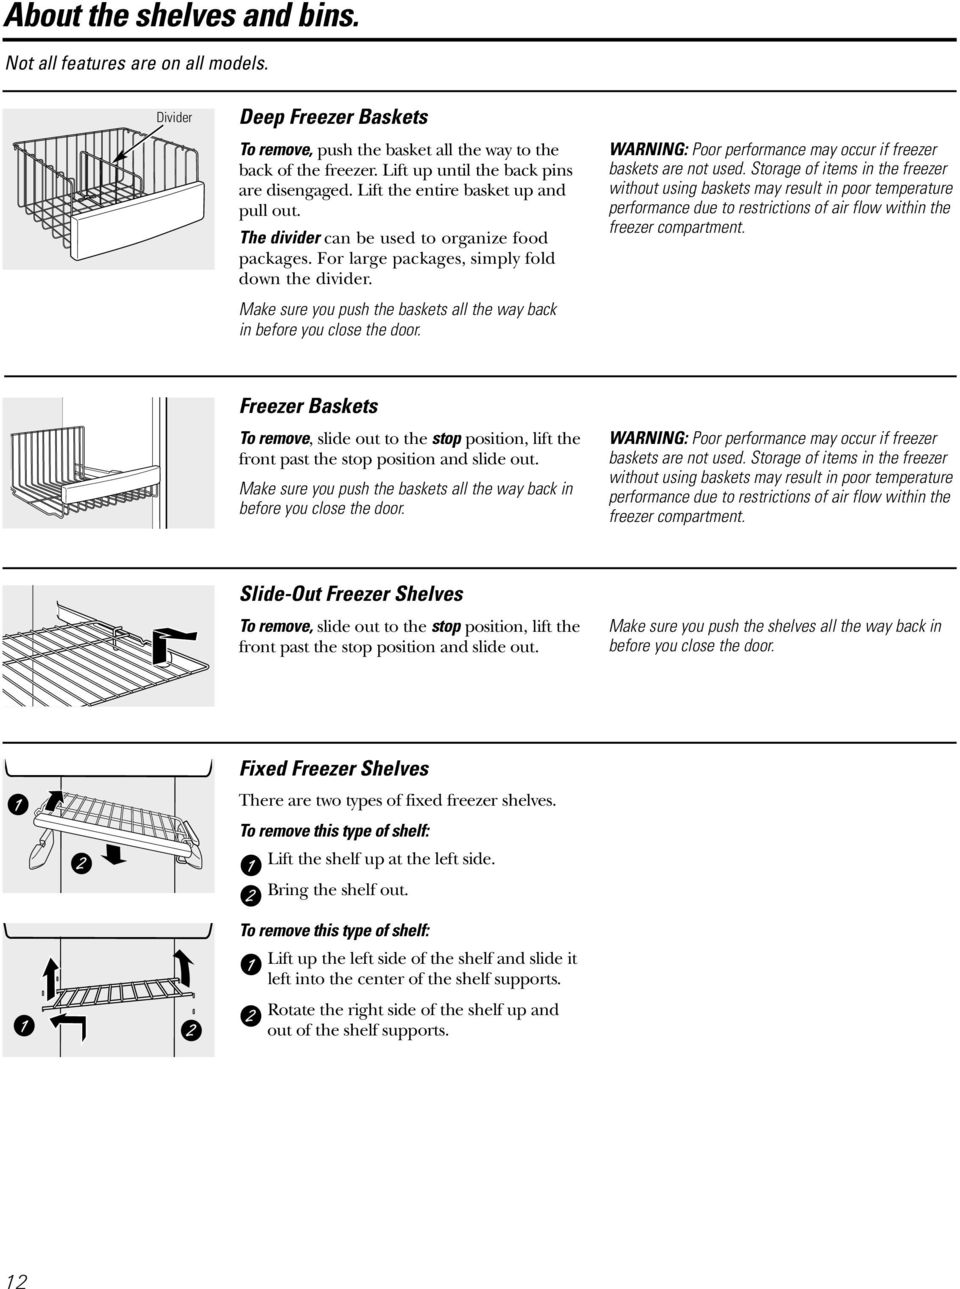 Make sure you push the baskets all the way back in before you close the door. WARNING: Poor performance may occur if freezer baskets are not used.